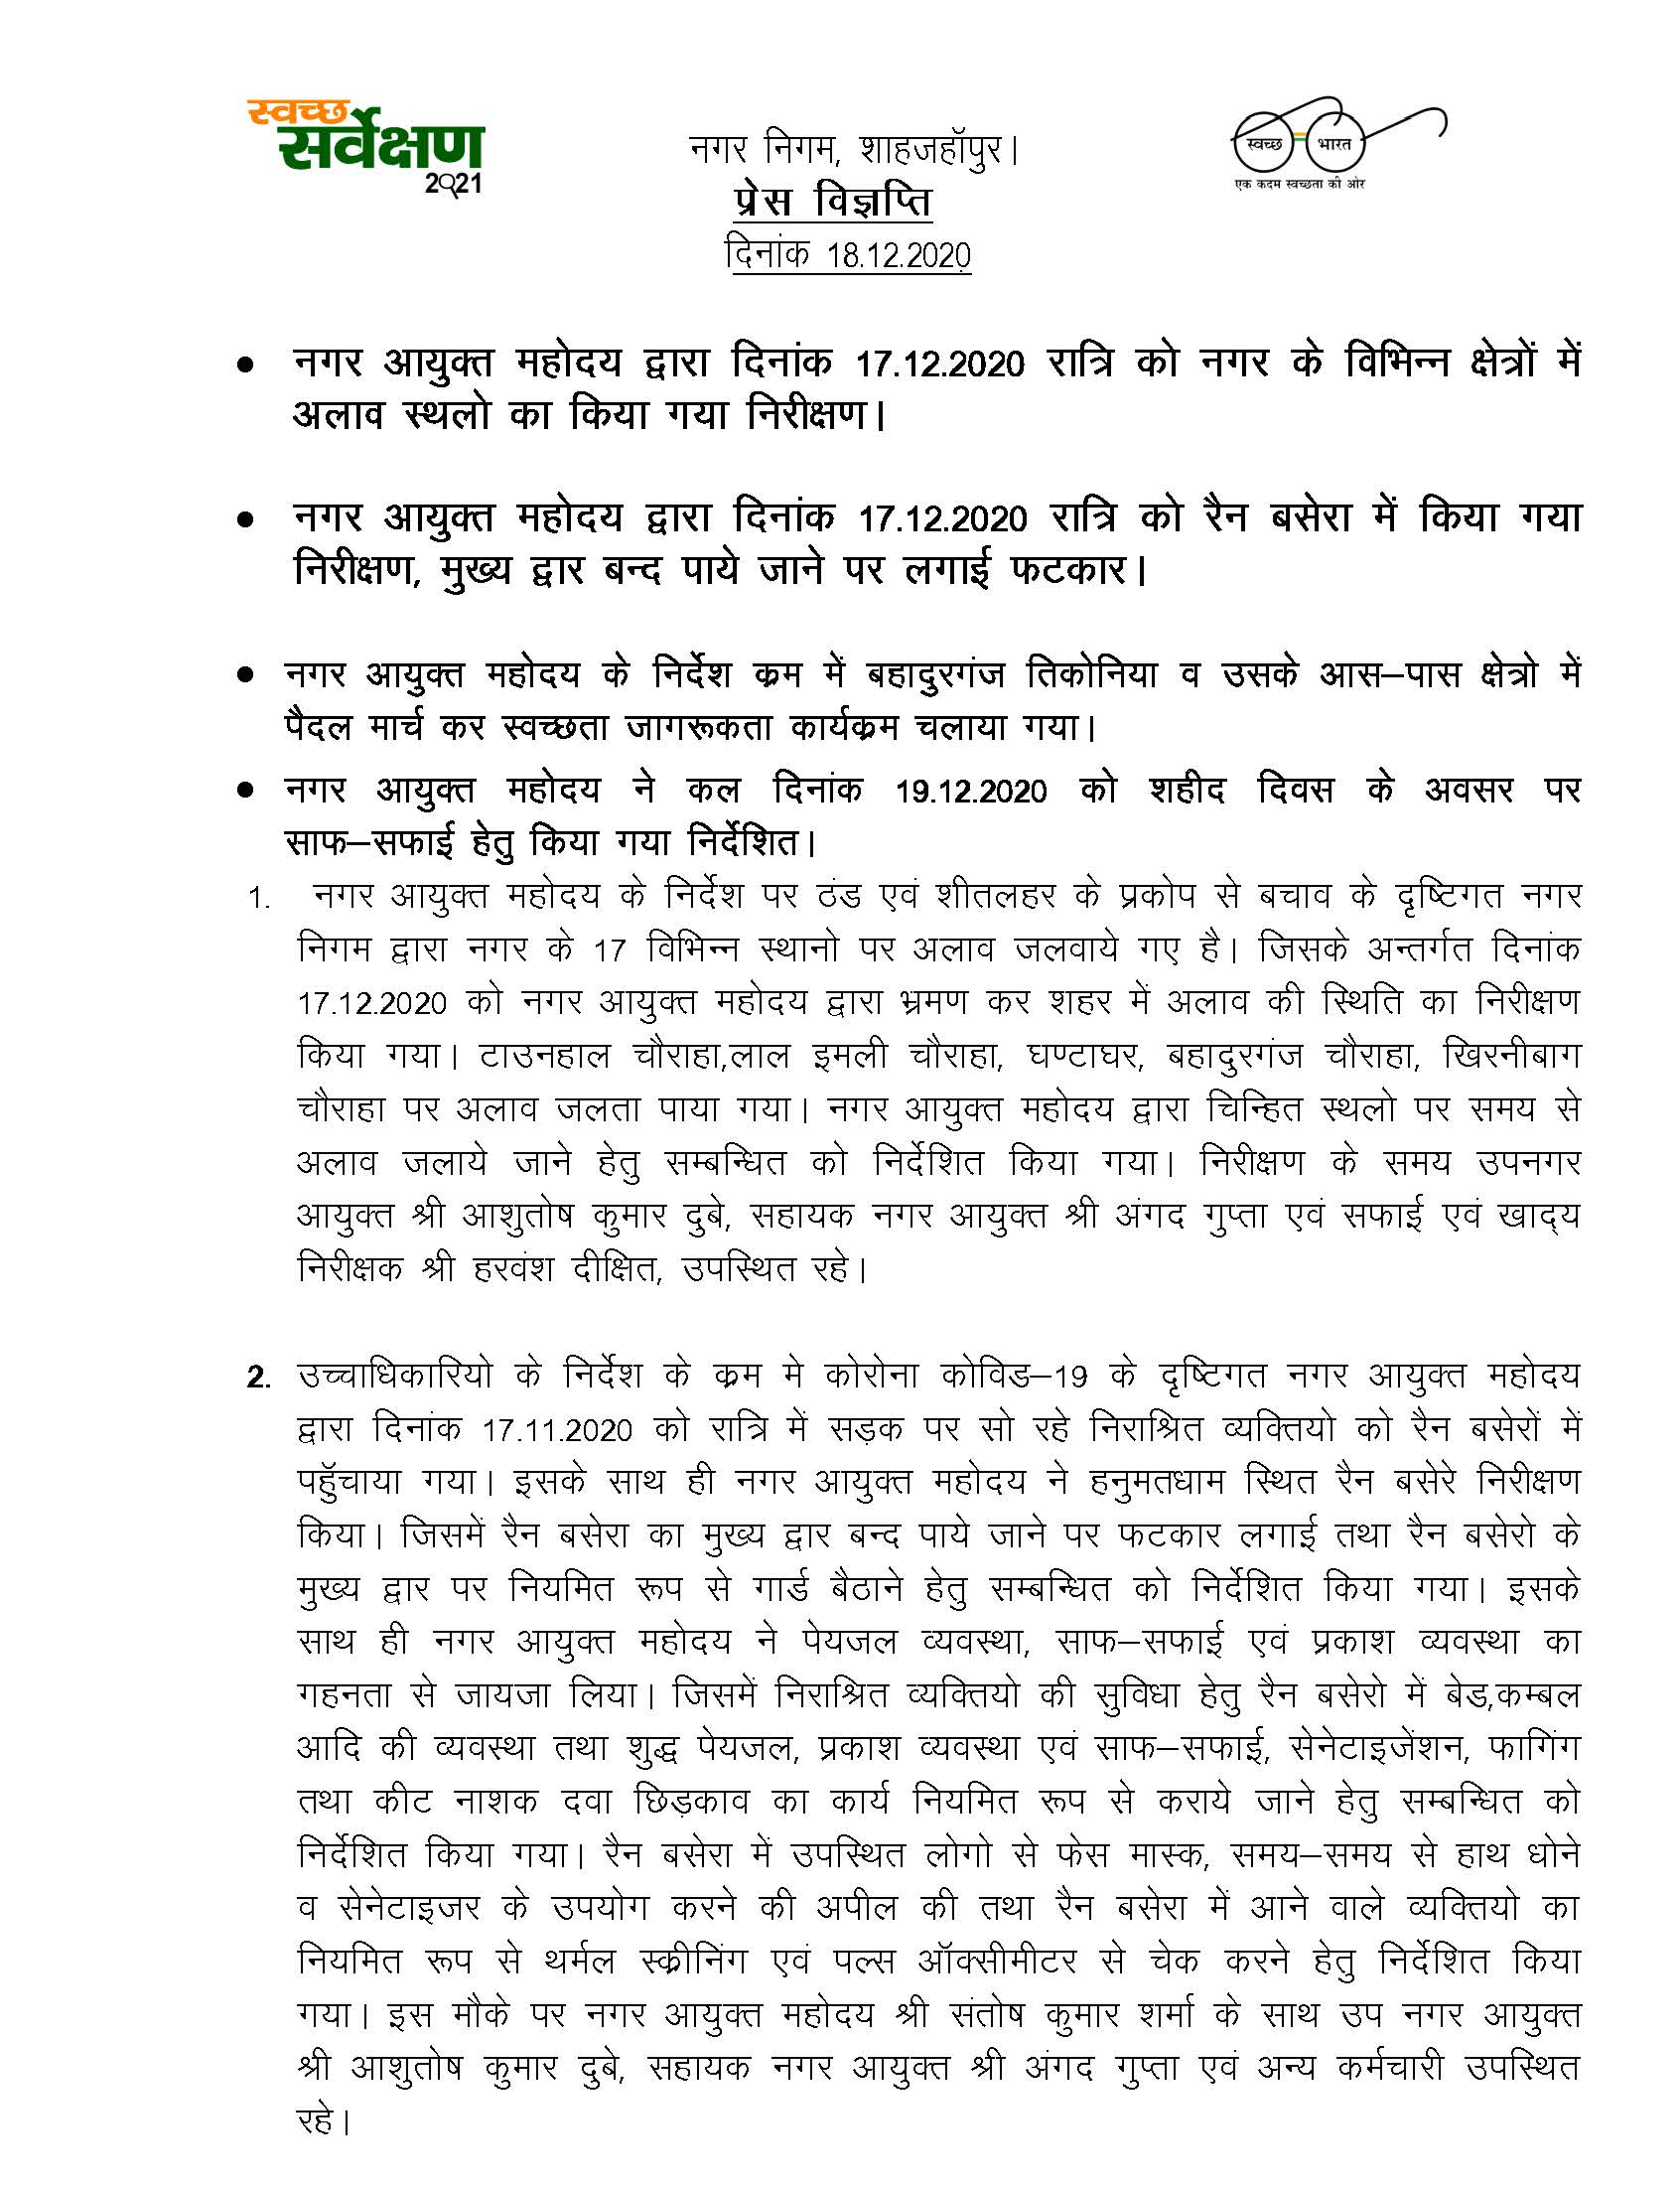 Regarding inspection of bonfire in various portions of the city during night of 17.12.2020 and various other inspections/issuance of guidelines by Municipal Commissioner